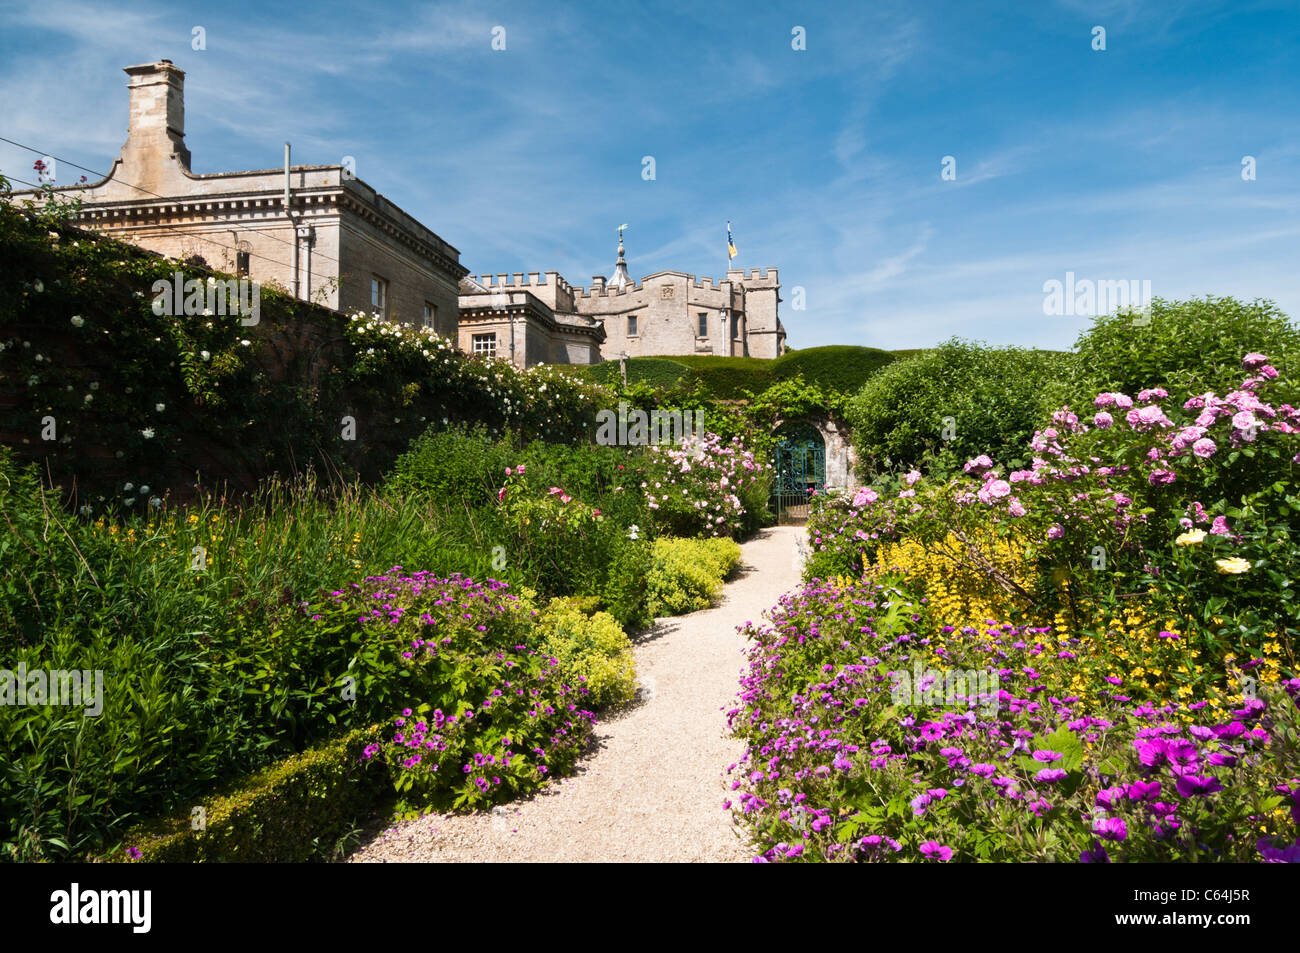 Colourful herbacious borders with roses line a gravel path within the walled garden of Rousham House, Oxfordshire, England Stock Photo